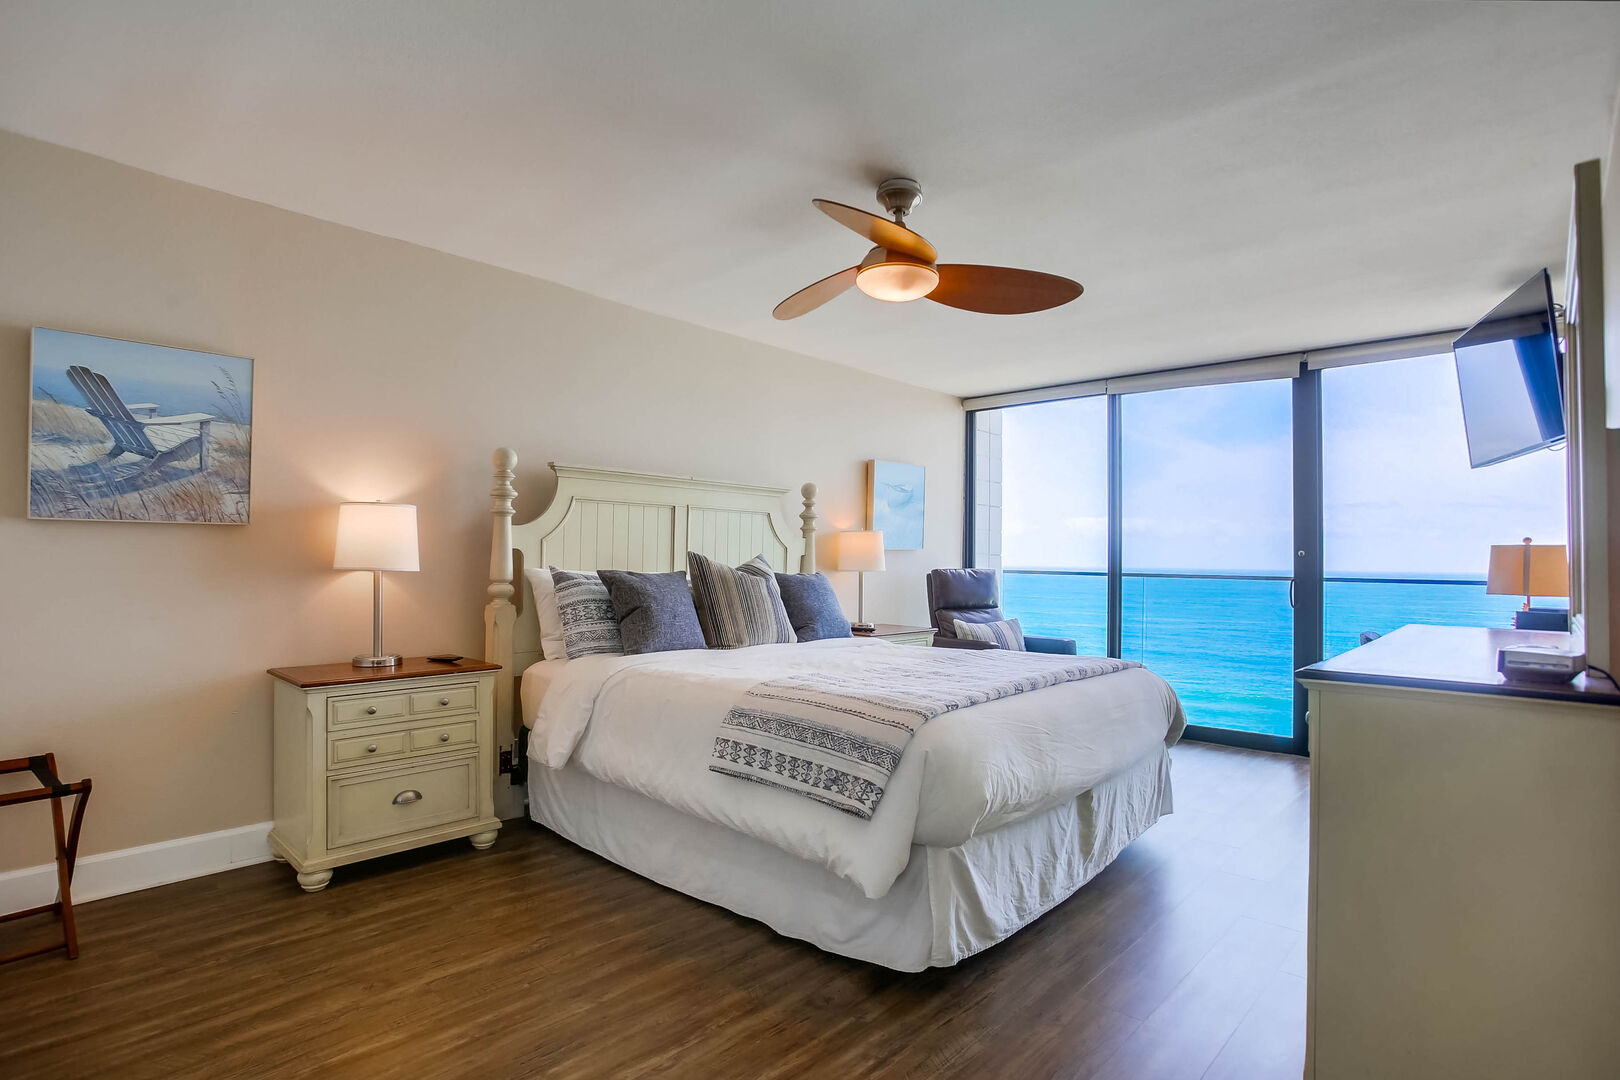 Master bedroom with dresser, ceiling fan, king size bed, dressers, TV and an ocean view